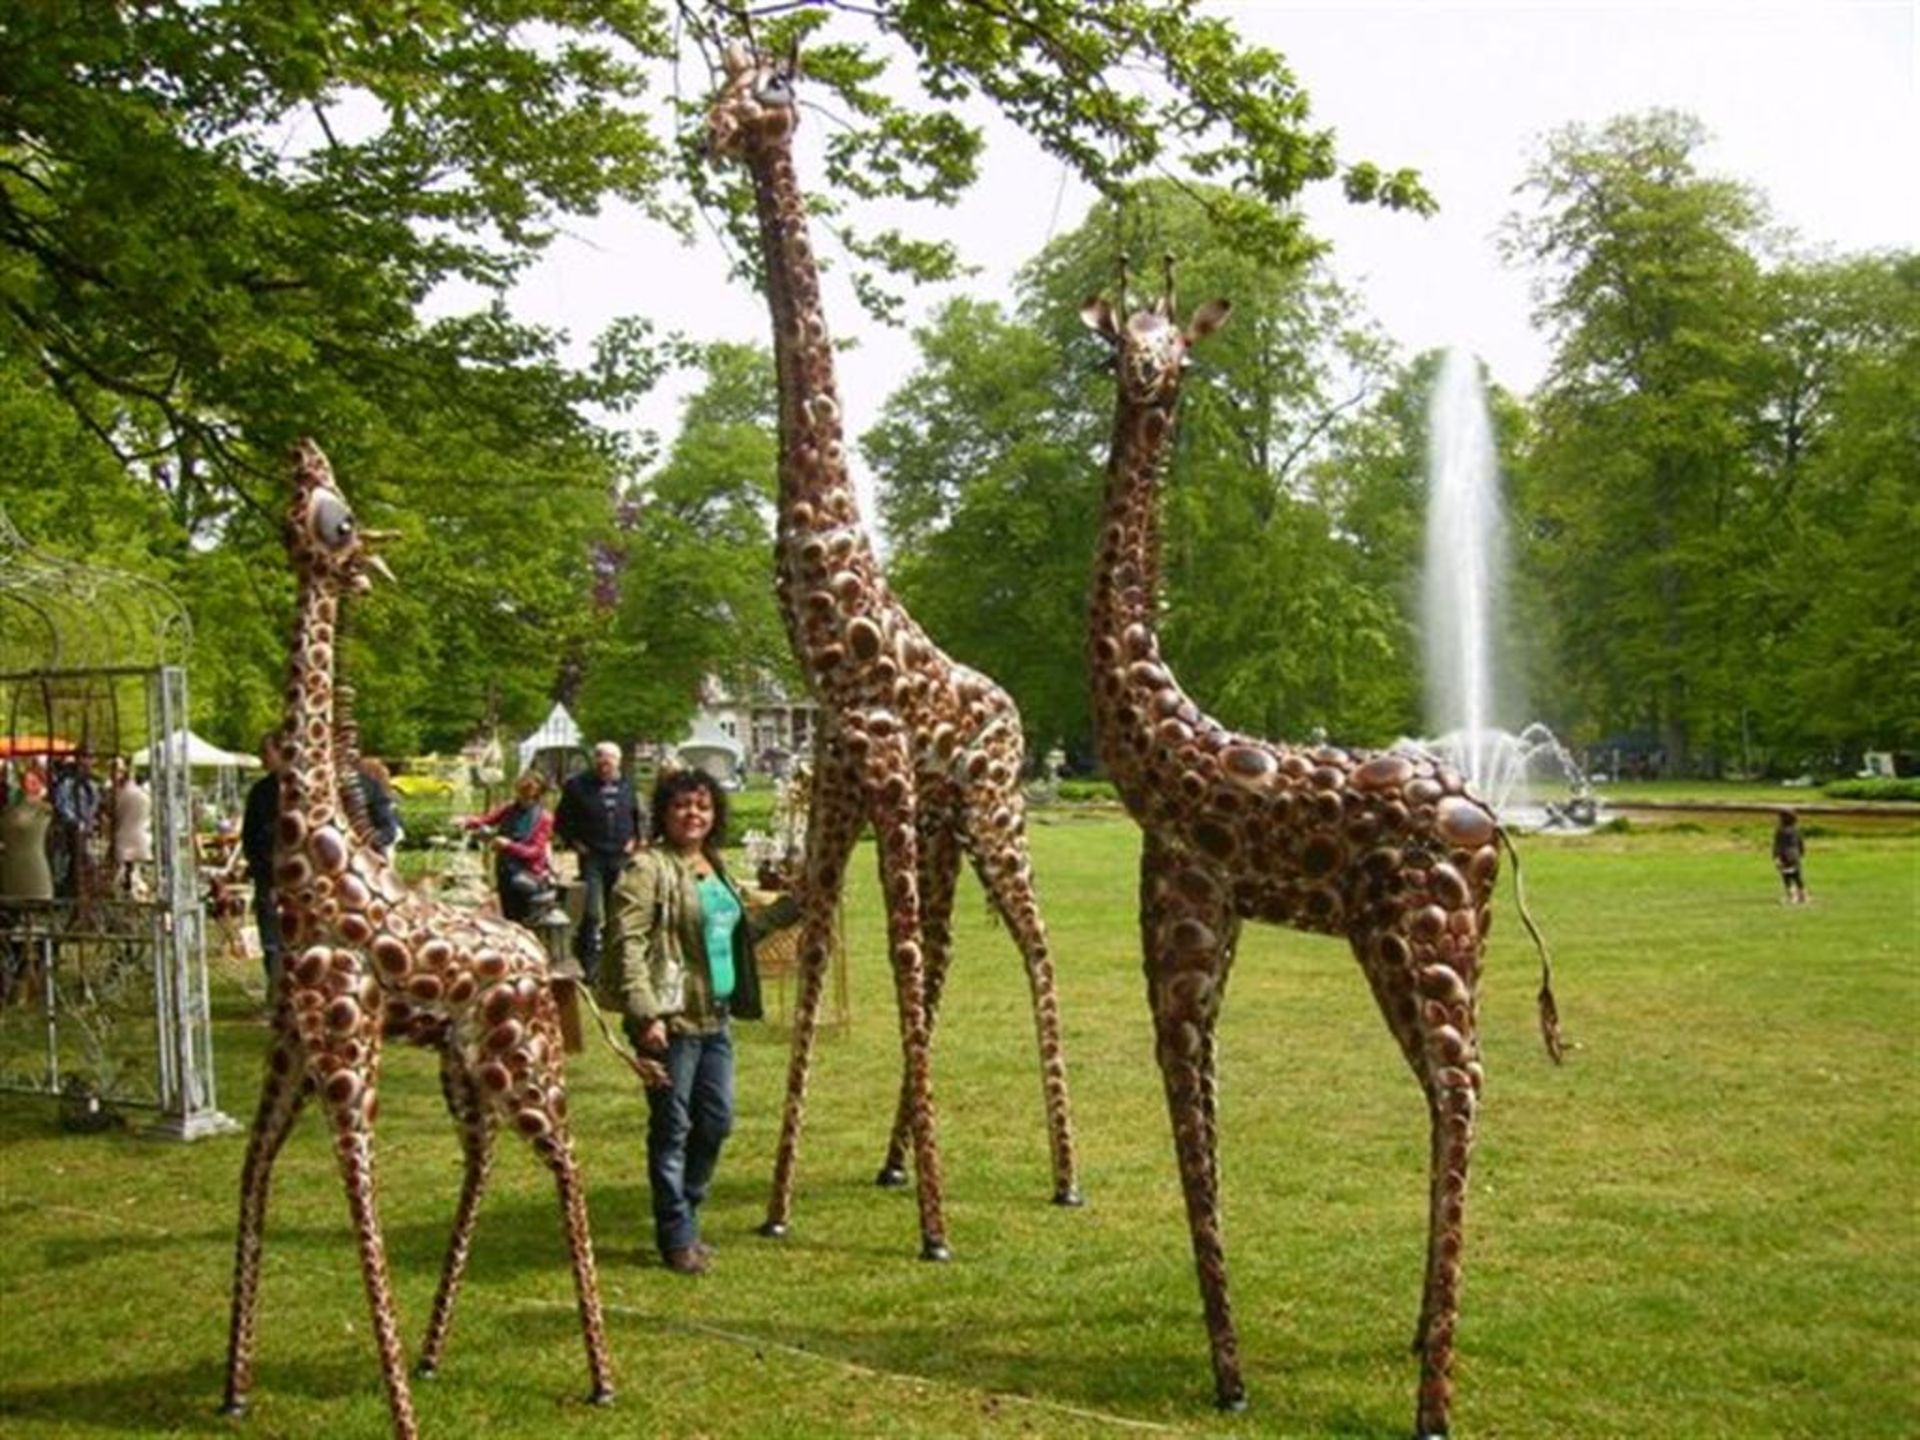 OVER 12FT HIGH! BEAUTIFUL LARGE GIRAFFE! *PLUS VAT*   IDEAL EVENTS, LARGE GARDENS, SHOWS ETC   GREAT - Image 2 of 5